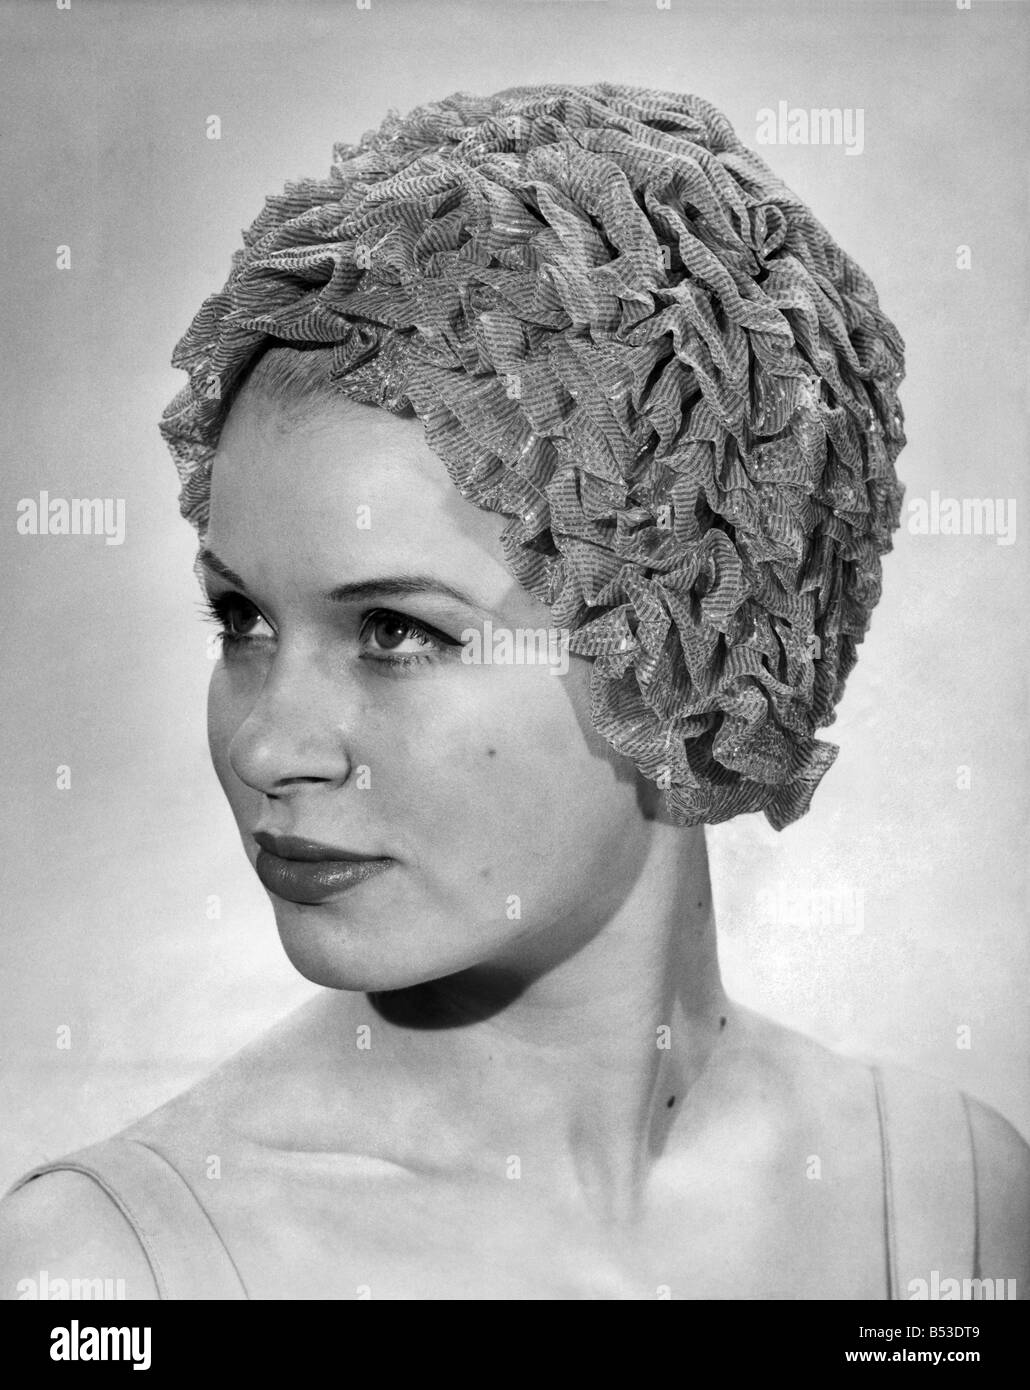 Clothing Beach: Frilly-Frilly layers of silver and gold, ruched and bunched closely together. Swimming hat. Humour. Price 39s. 6d. June 1965 P018018 Stock Photo